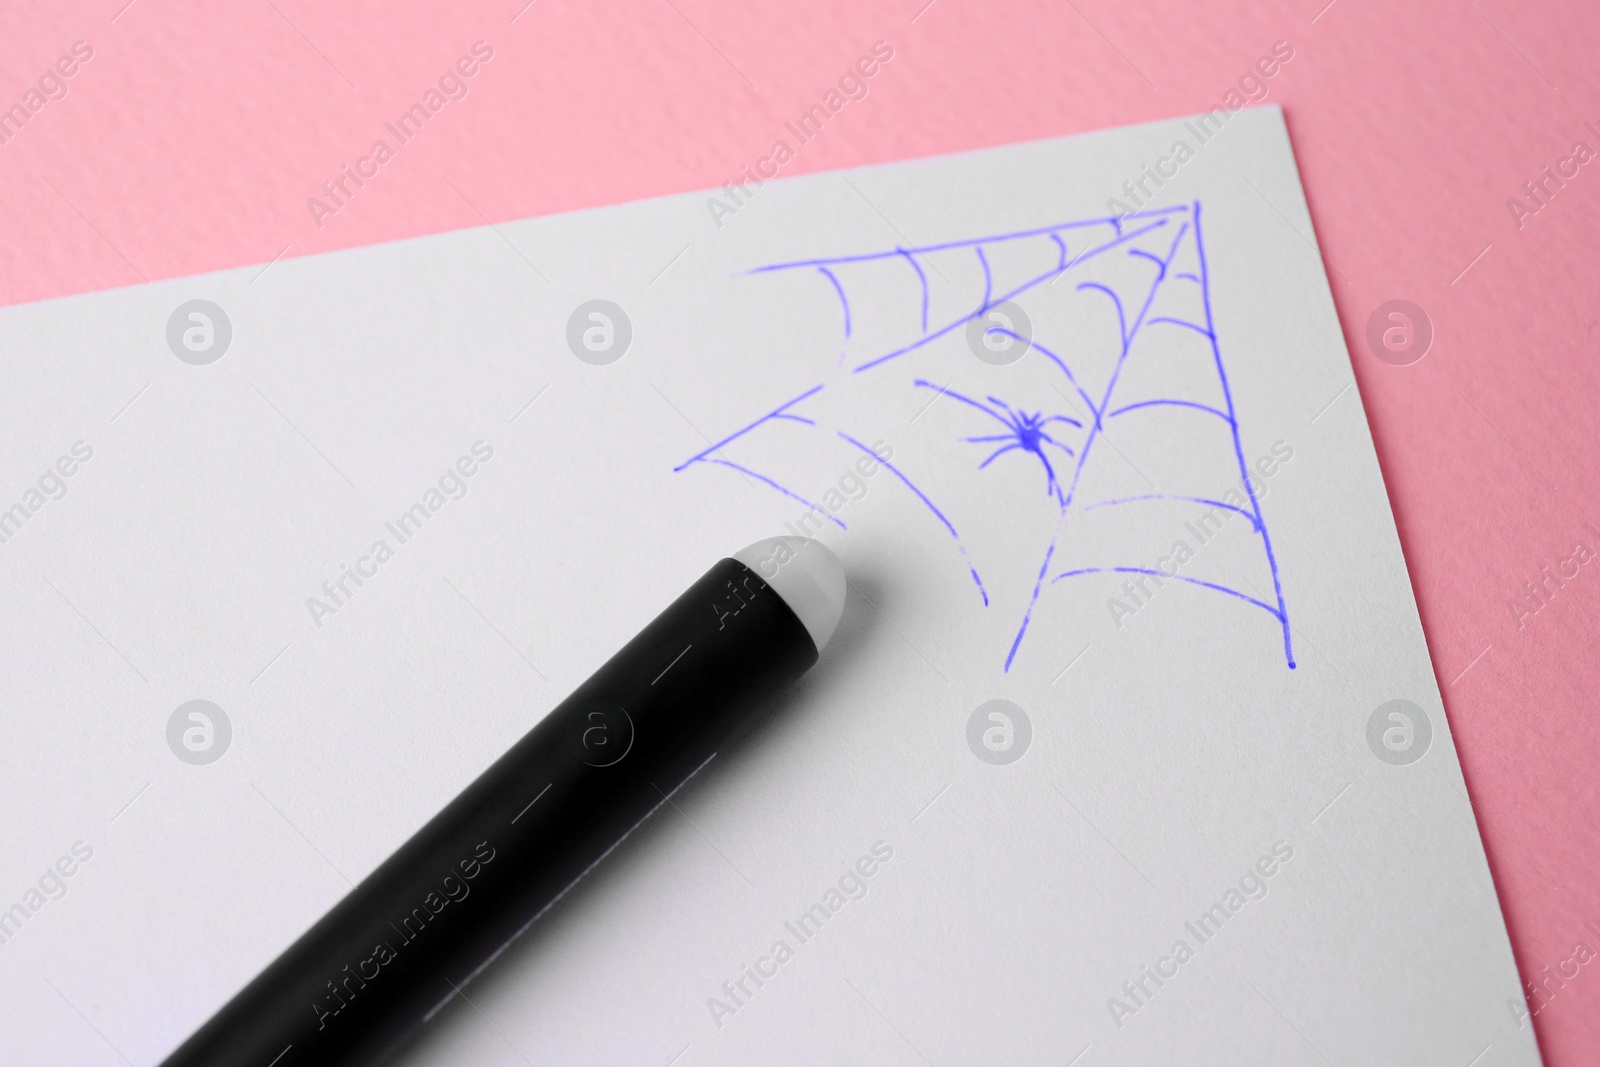 Photo of Web drawn on sheet of paper with erasable pen against pink background, closeup